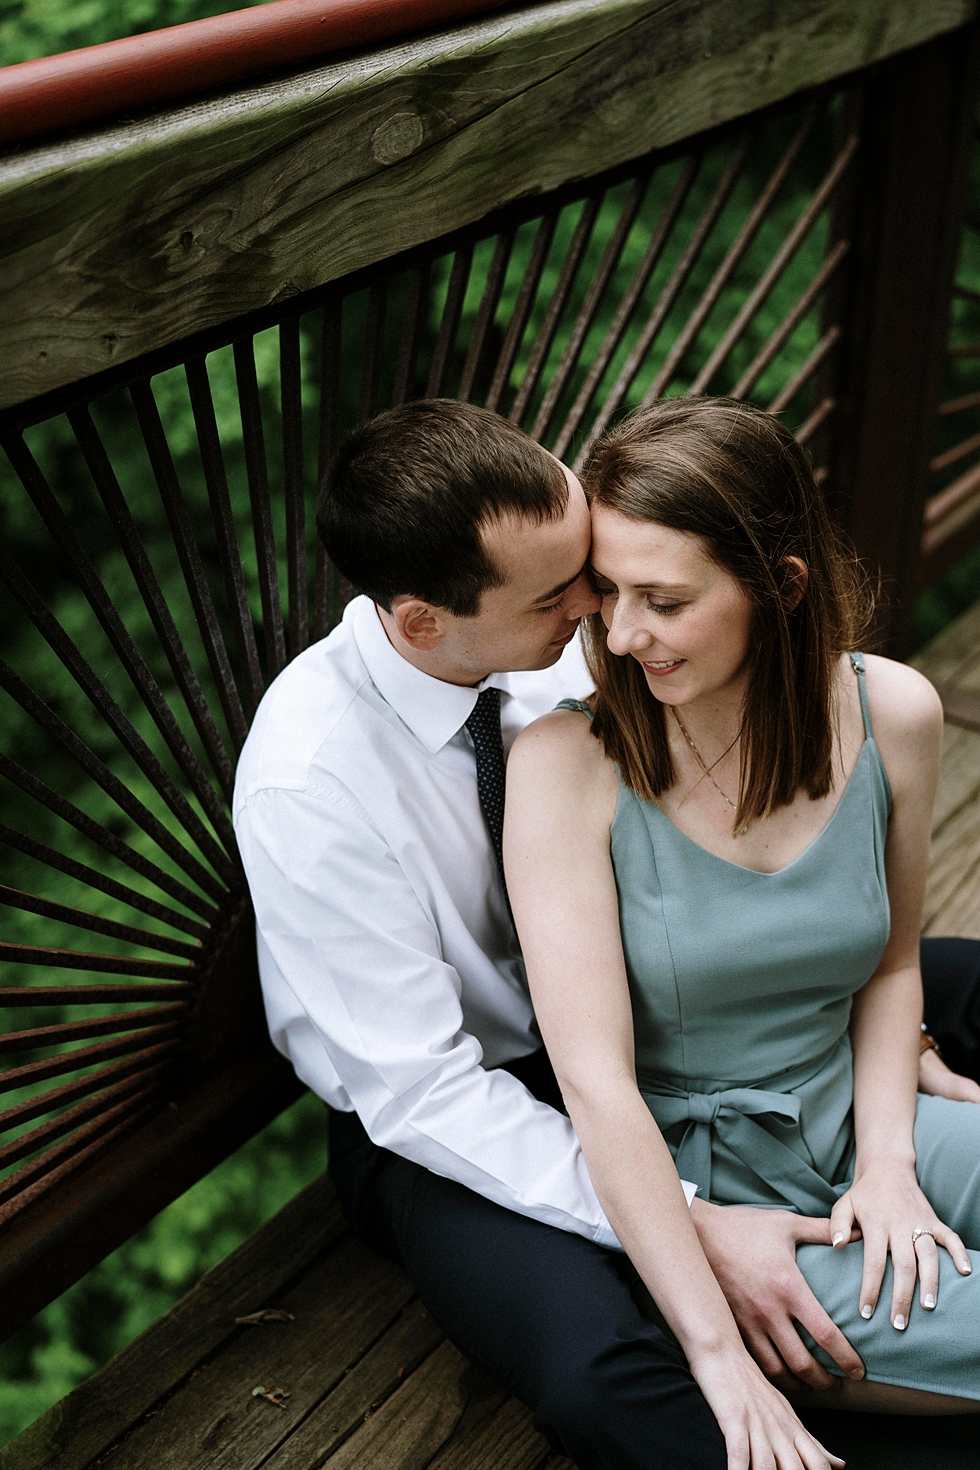  Love is in the air for these sweethearts at Bernheim forest in Louisville Kentucky. spring engagement photoshoot Bernheim forest Louisville Kentucky photography by Lauren fiancé wedding announcement photos love getting married southern wedding engag